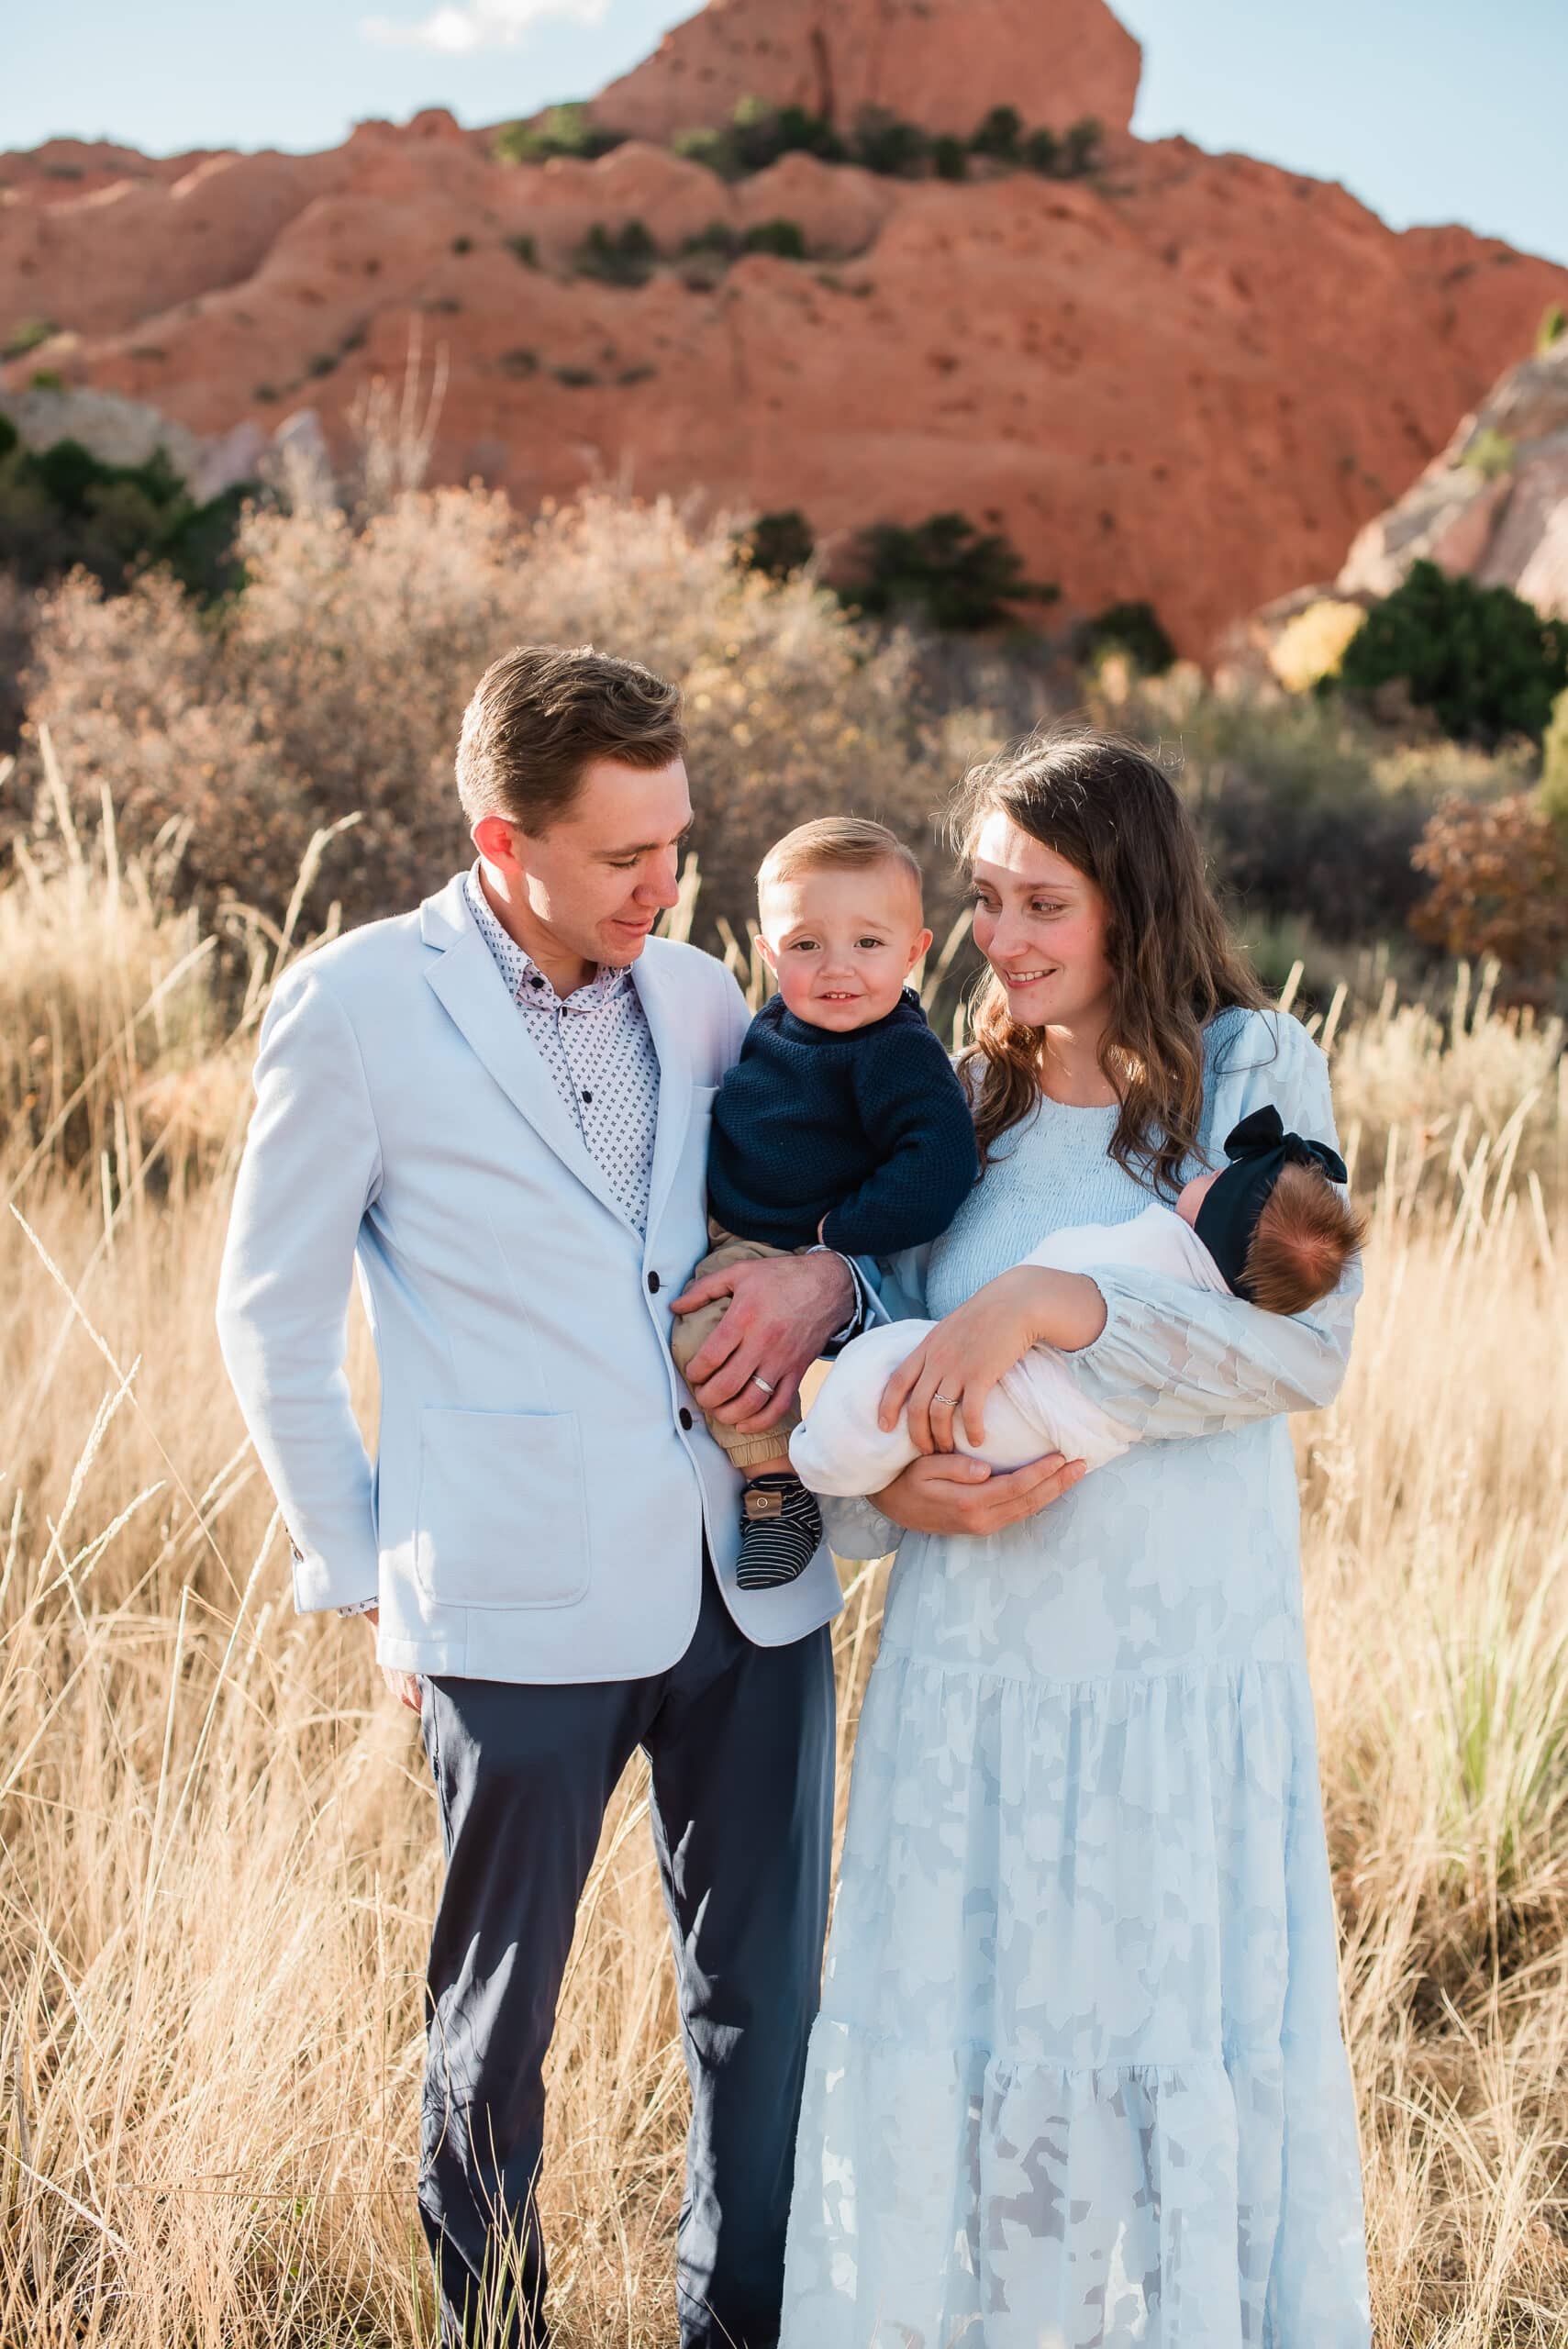 About Us -Meet one of the owners, Nathan, of Footprint Home Experts. Foot Print Home Experts proudly serves Colorado Springs, Monument, Castlerock, Denver, Peyton, and Black Forrest.